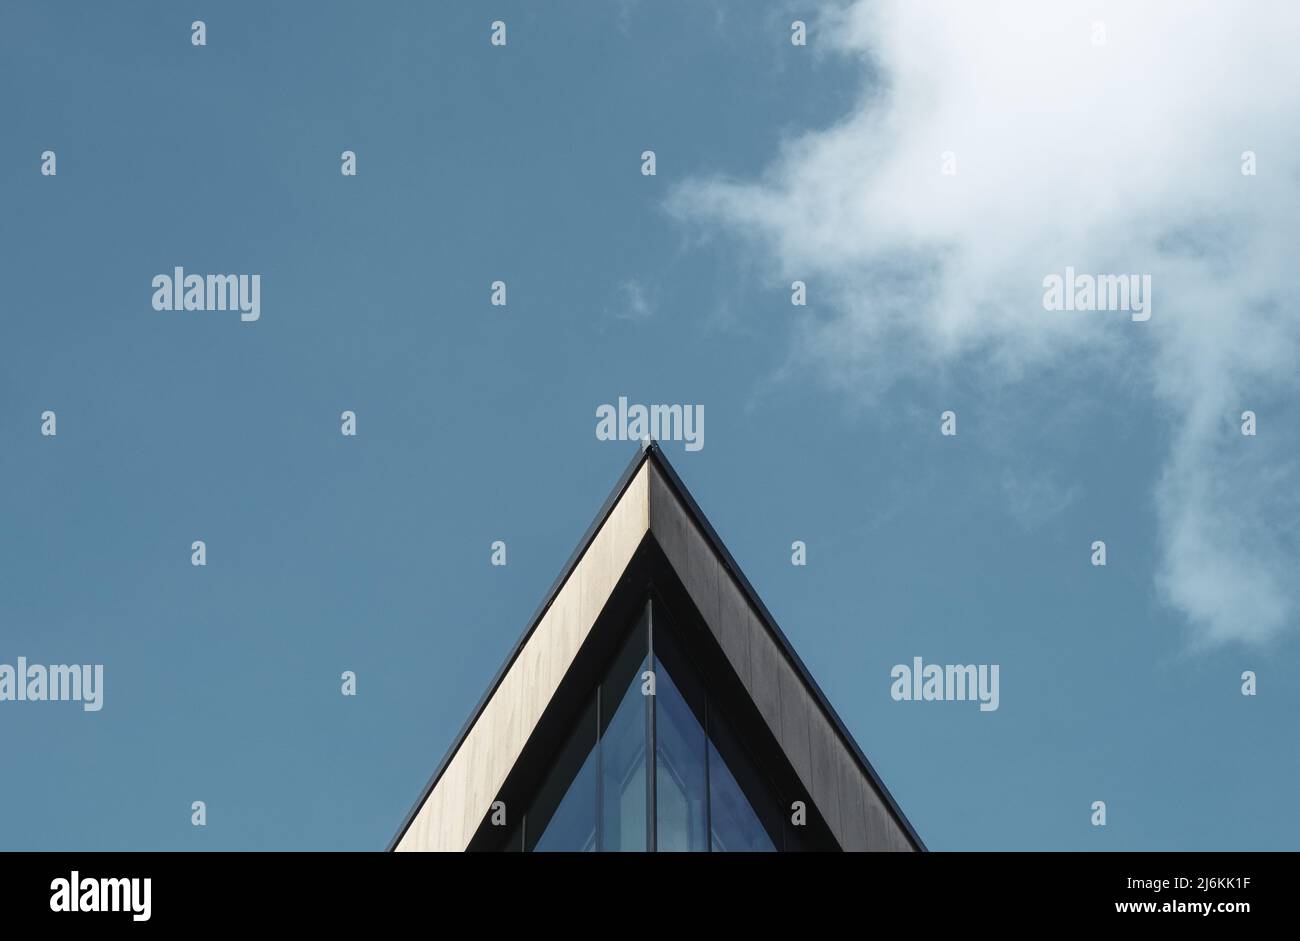 Abstract Architectural Image Of A Triangular Building Against A Blue Sky WIth Clouds And Copy Space Stock Photo